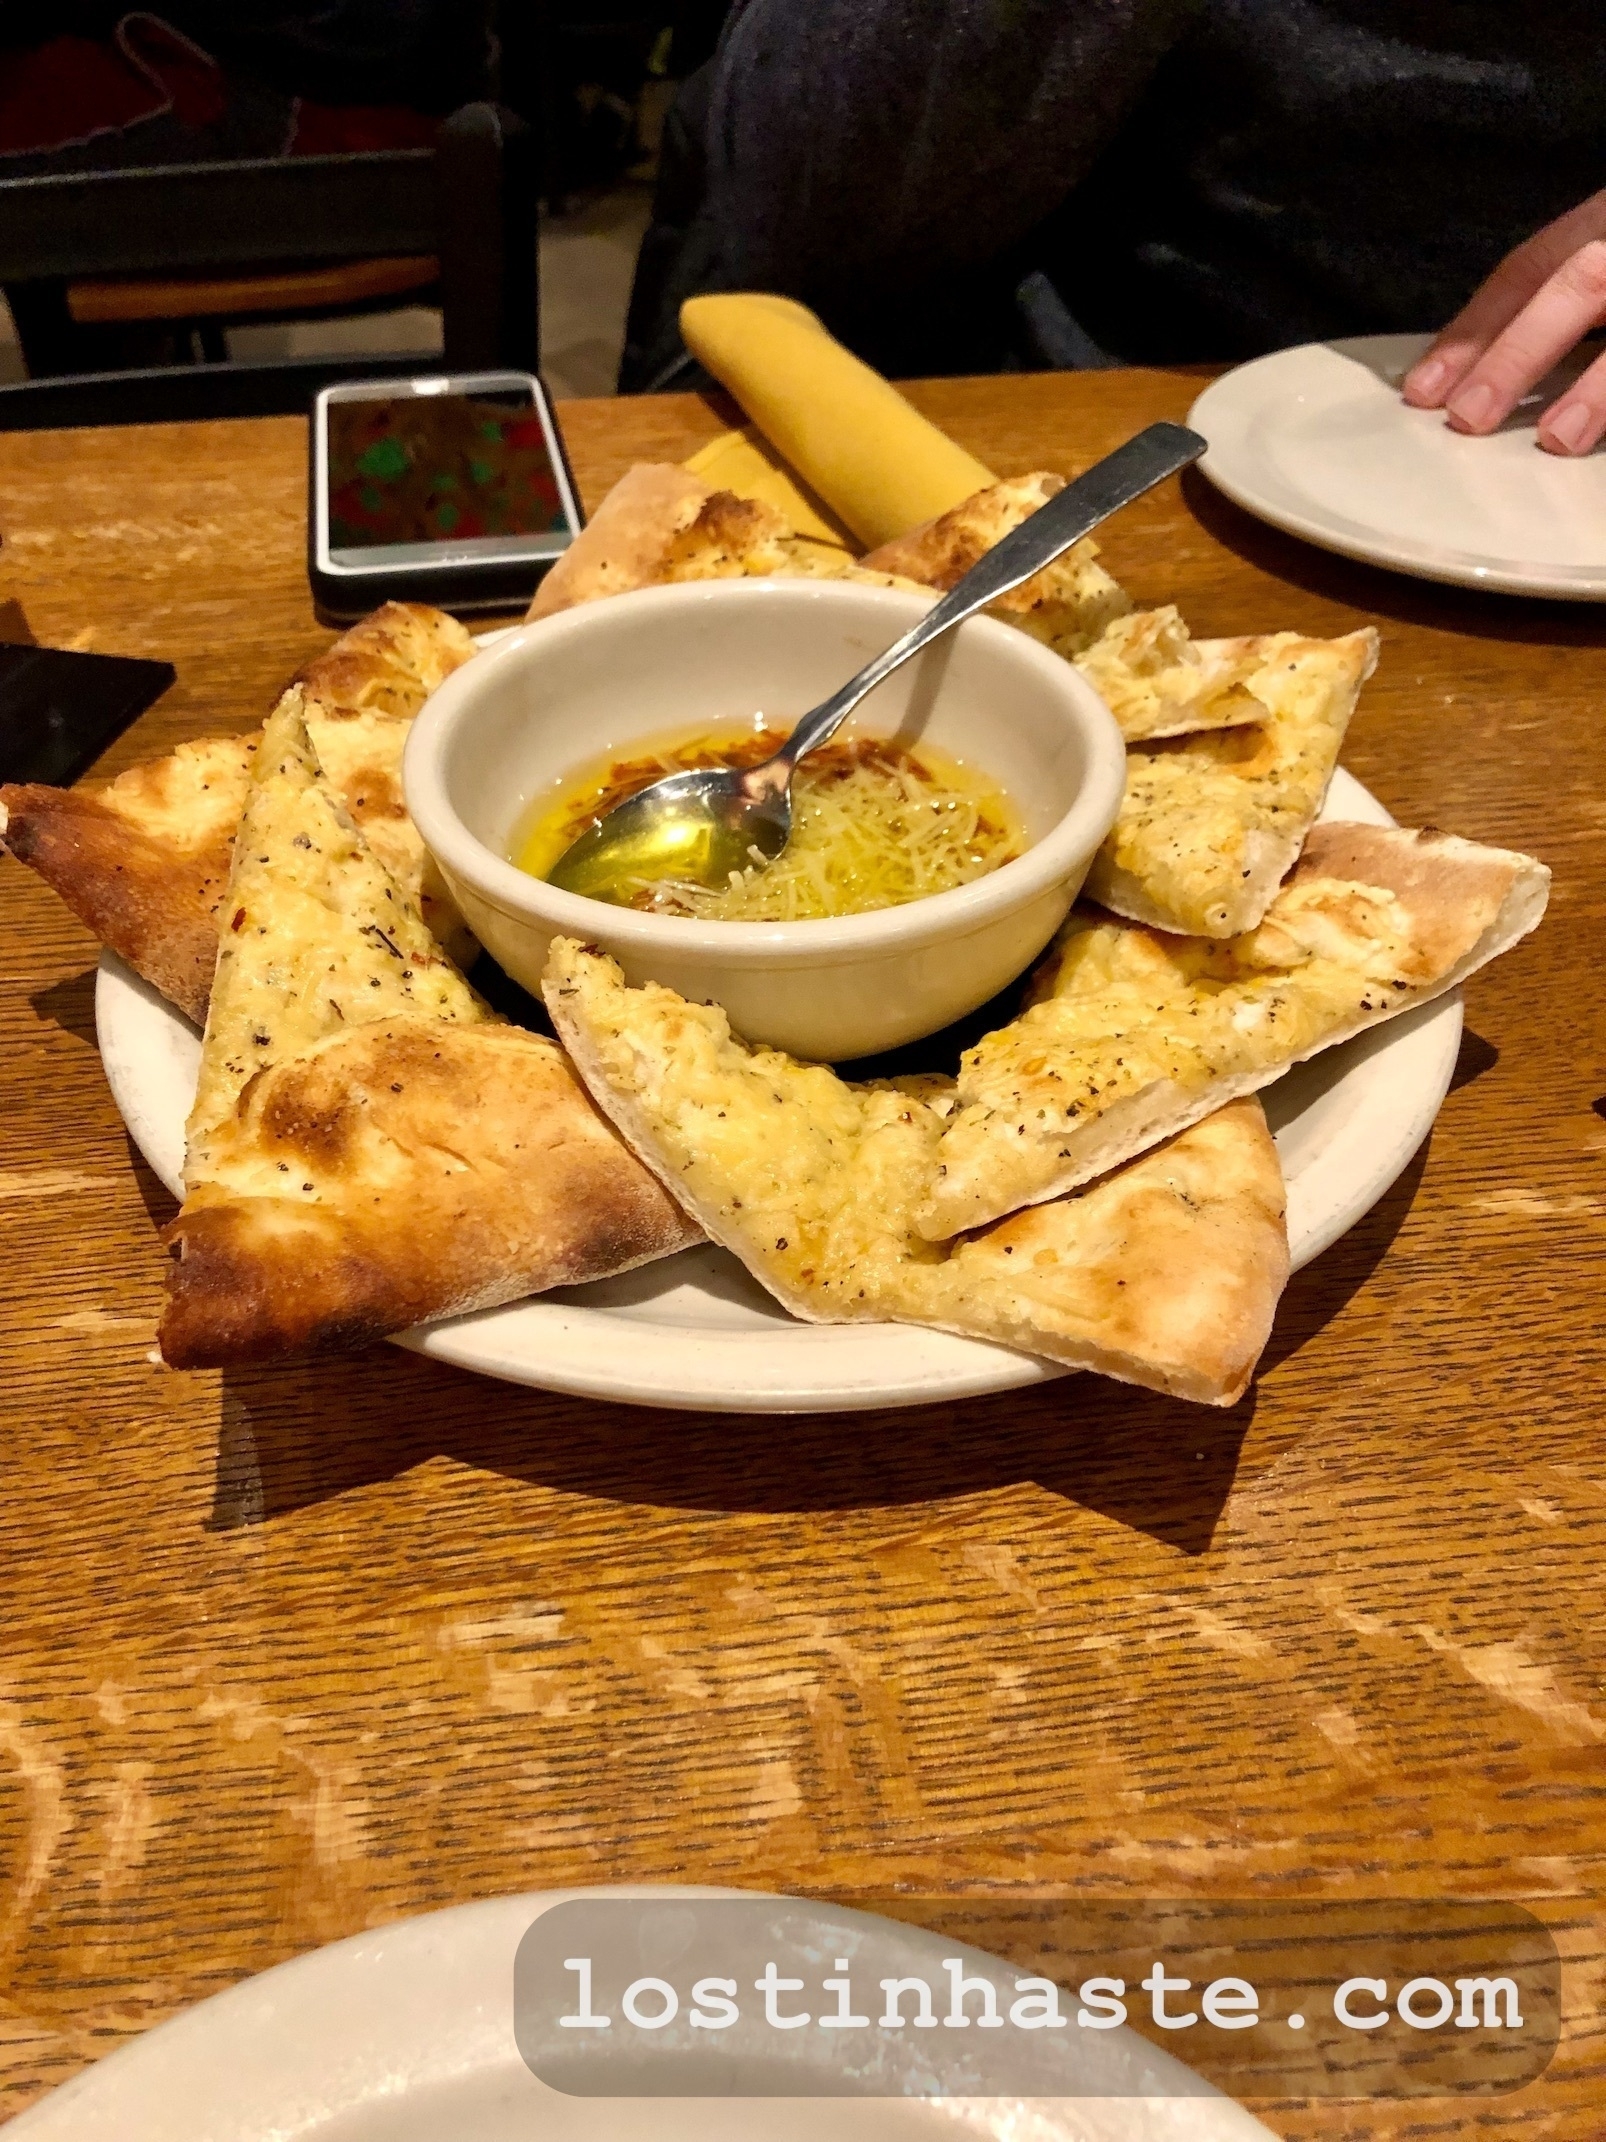 Triangular flatbread pieces surround a bowl of olive oil on a wooden table, suggesting a meal setting. Text at the bottom reads 'lostinhaiste.com'.